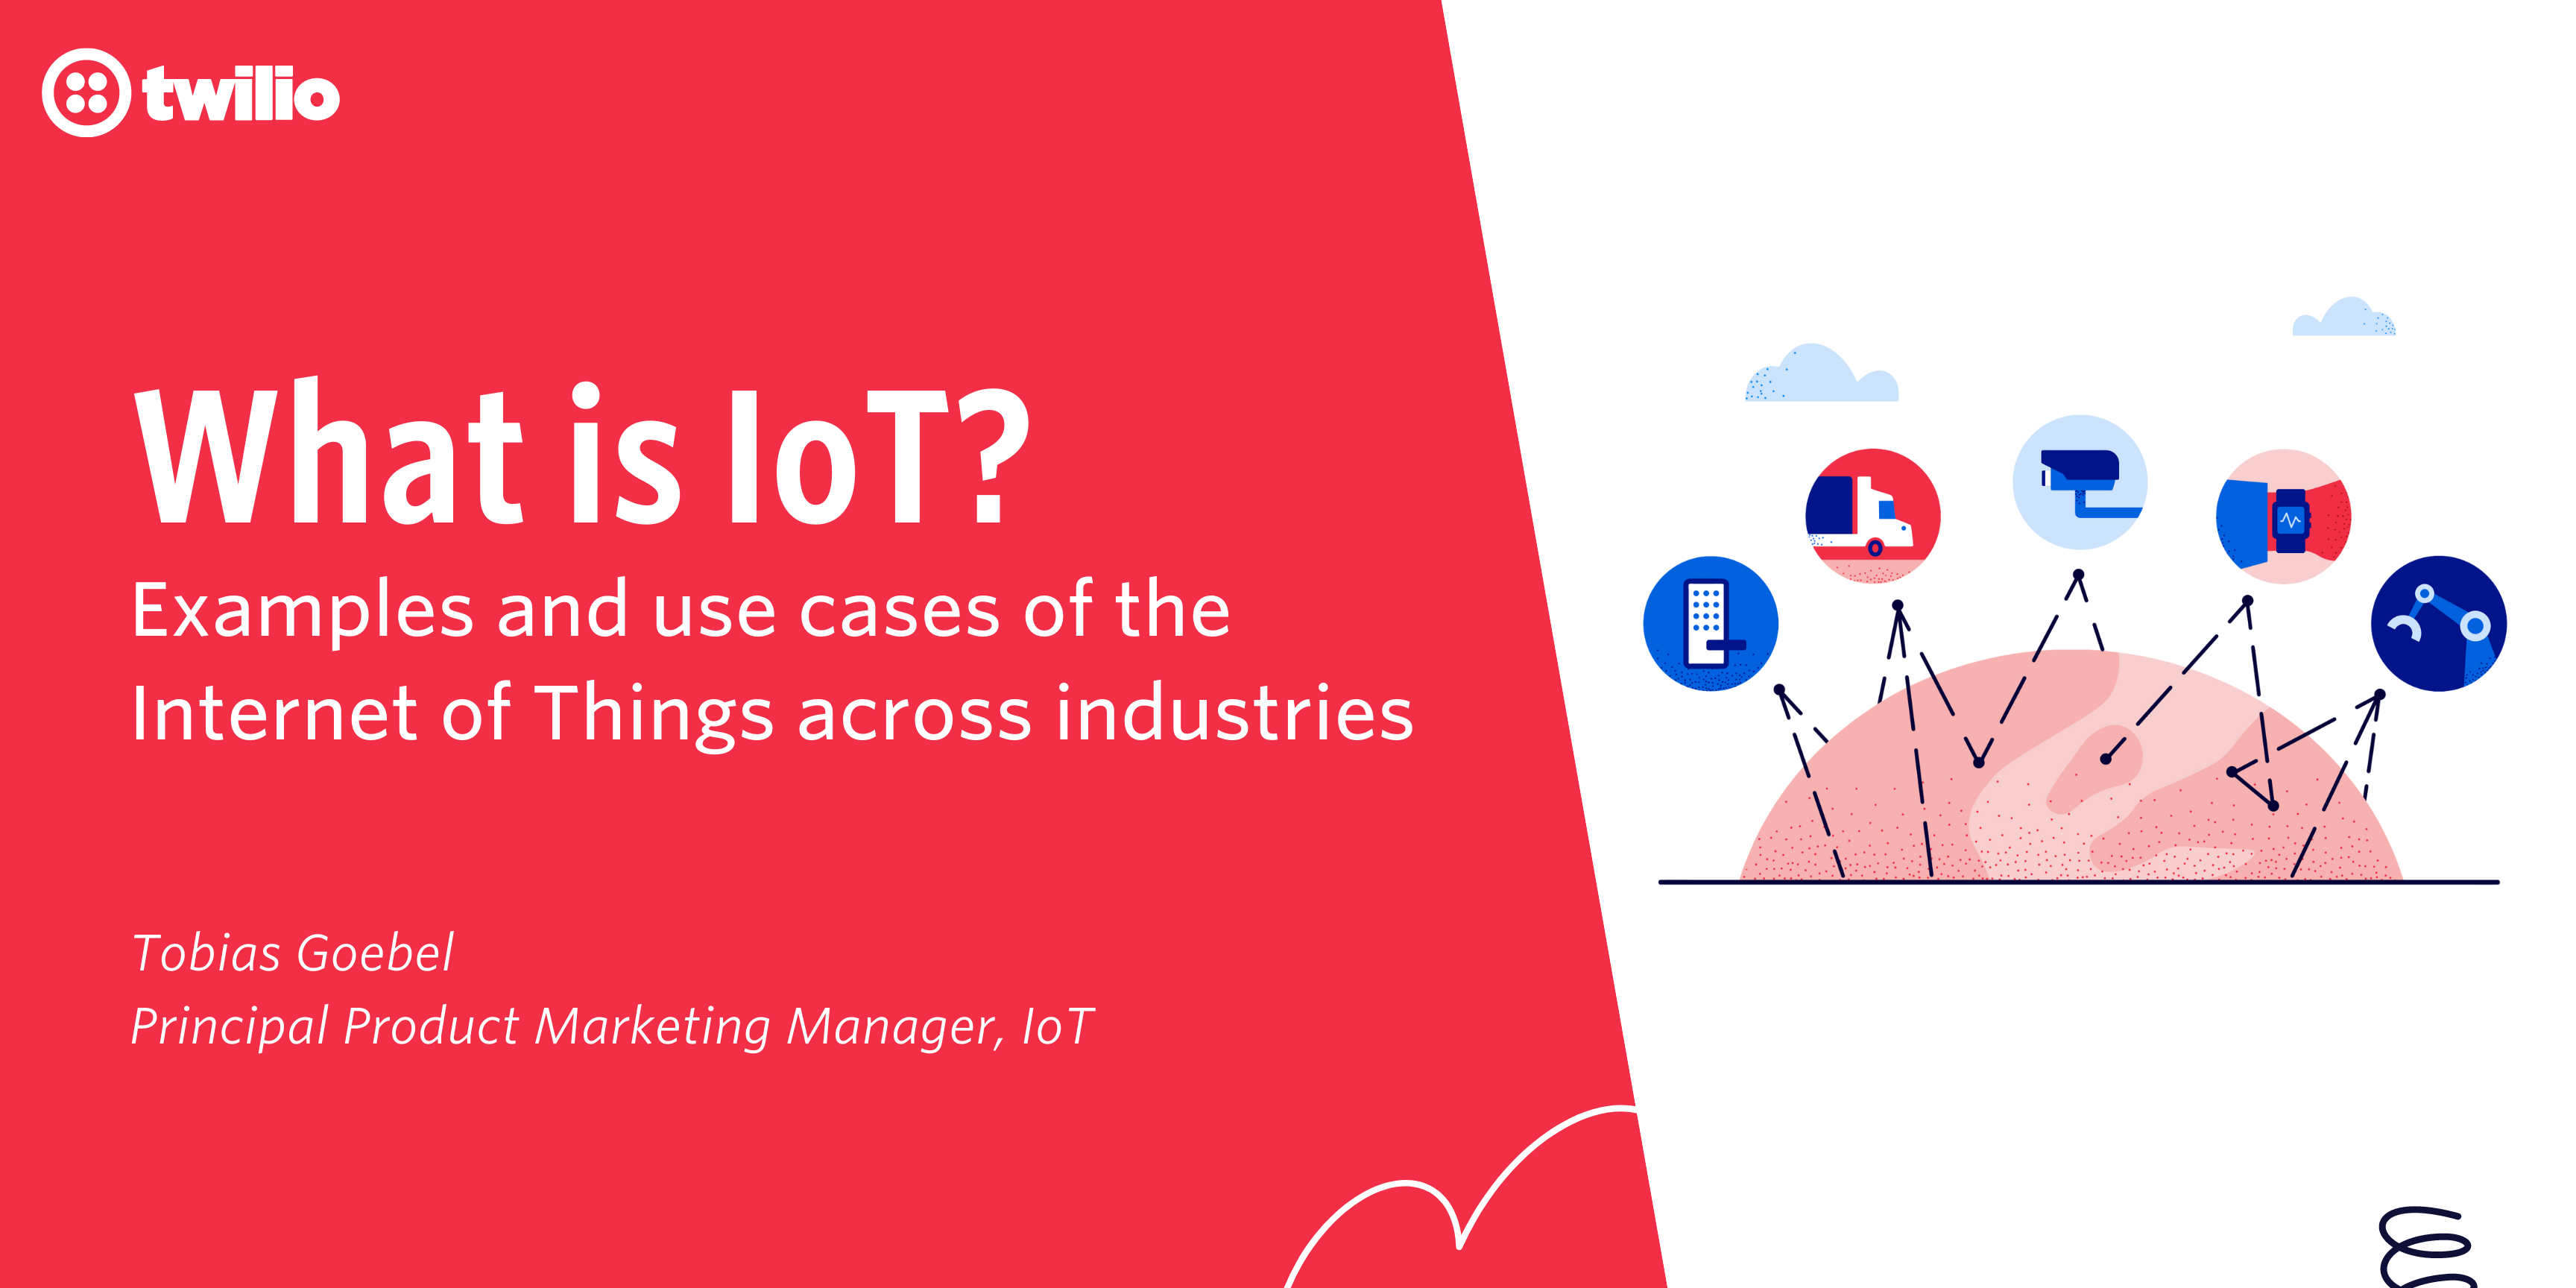 What is IoT? Examples and use cases of the Internet of Things across industries